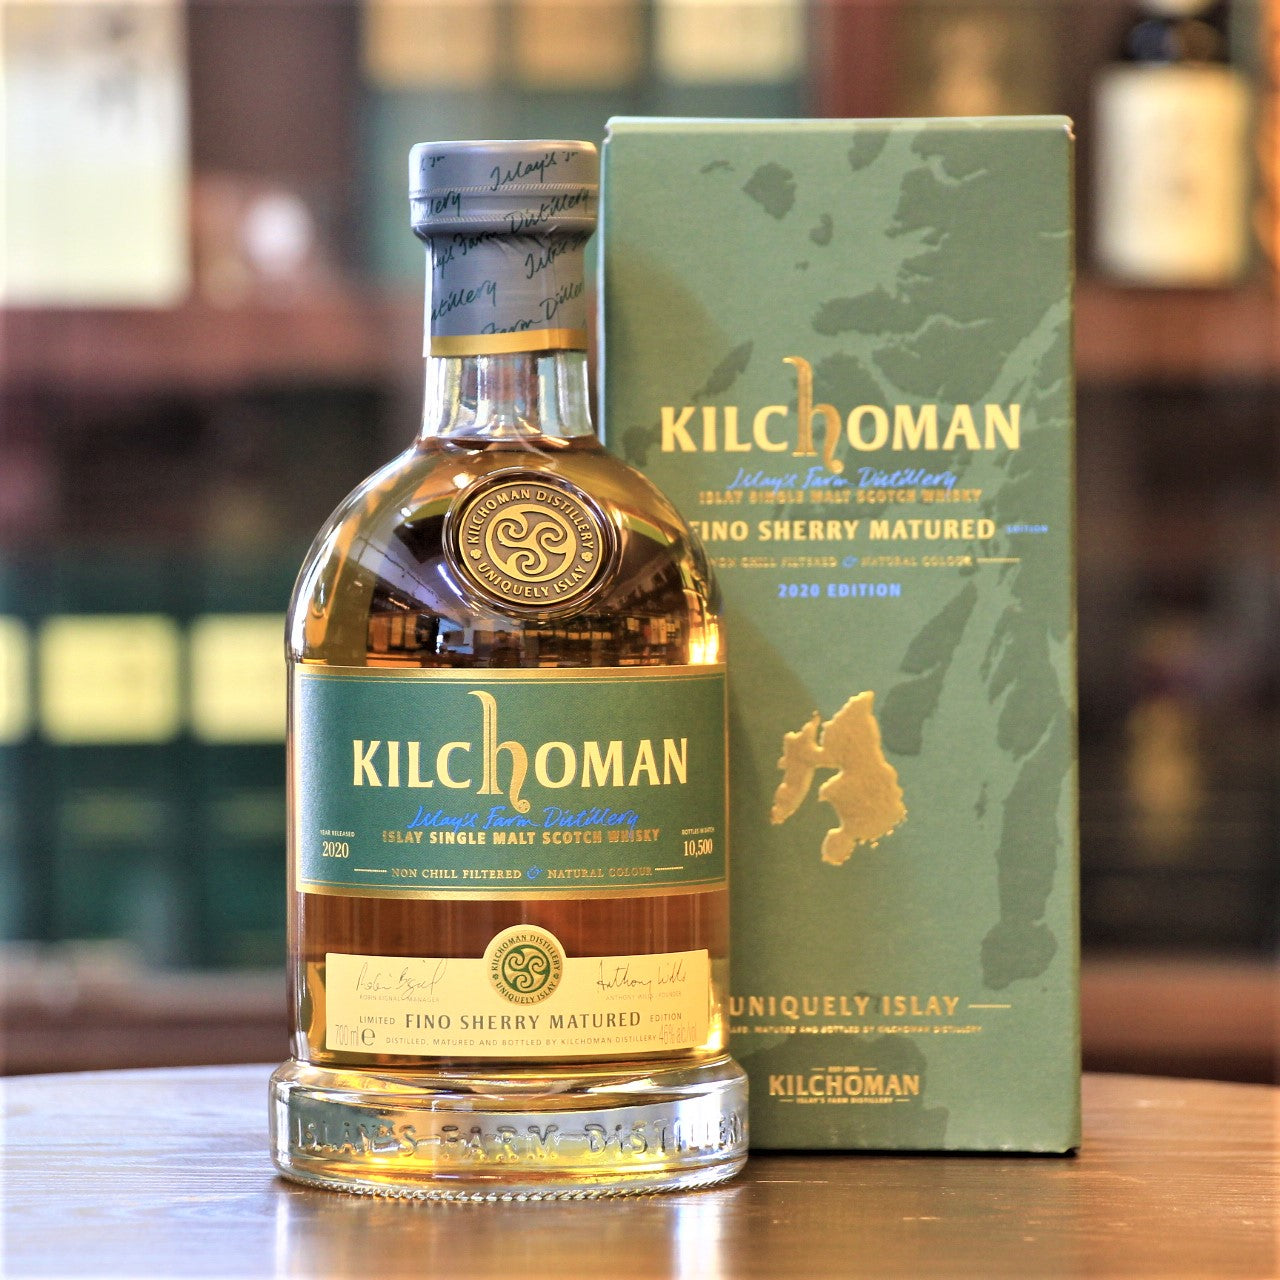 An exclusive and limited Fino Sherry Cask Matured whisky from Kilchoman Islay Whisky Distillery. An absolutely fabulous Single Malt Scotch Whisky. Now available at your friendly neighbourhood Mizunara The Shop in HK